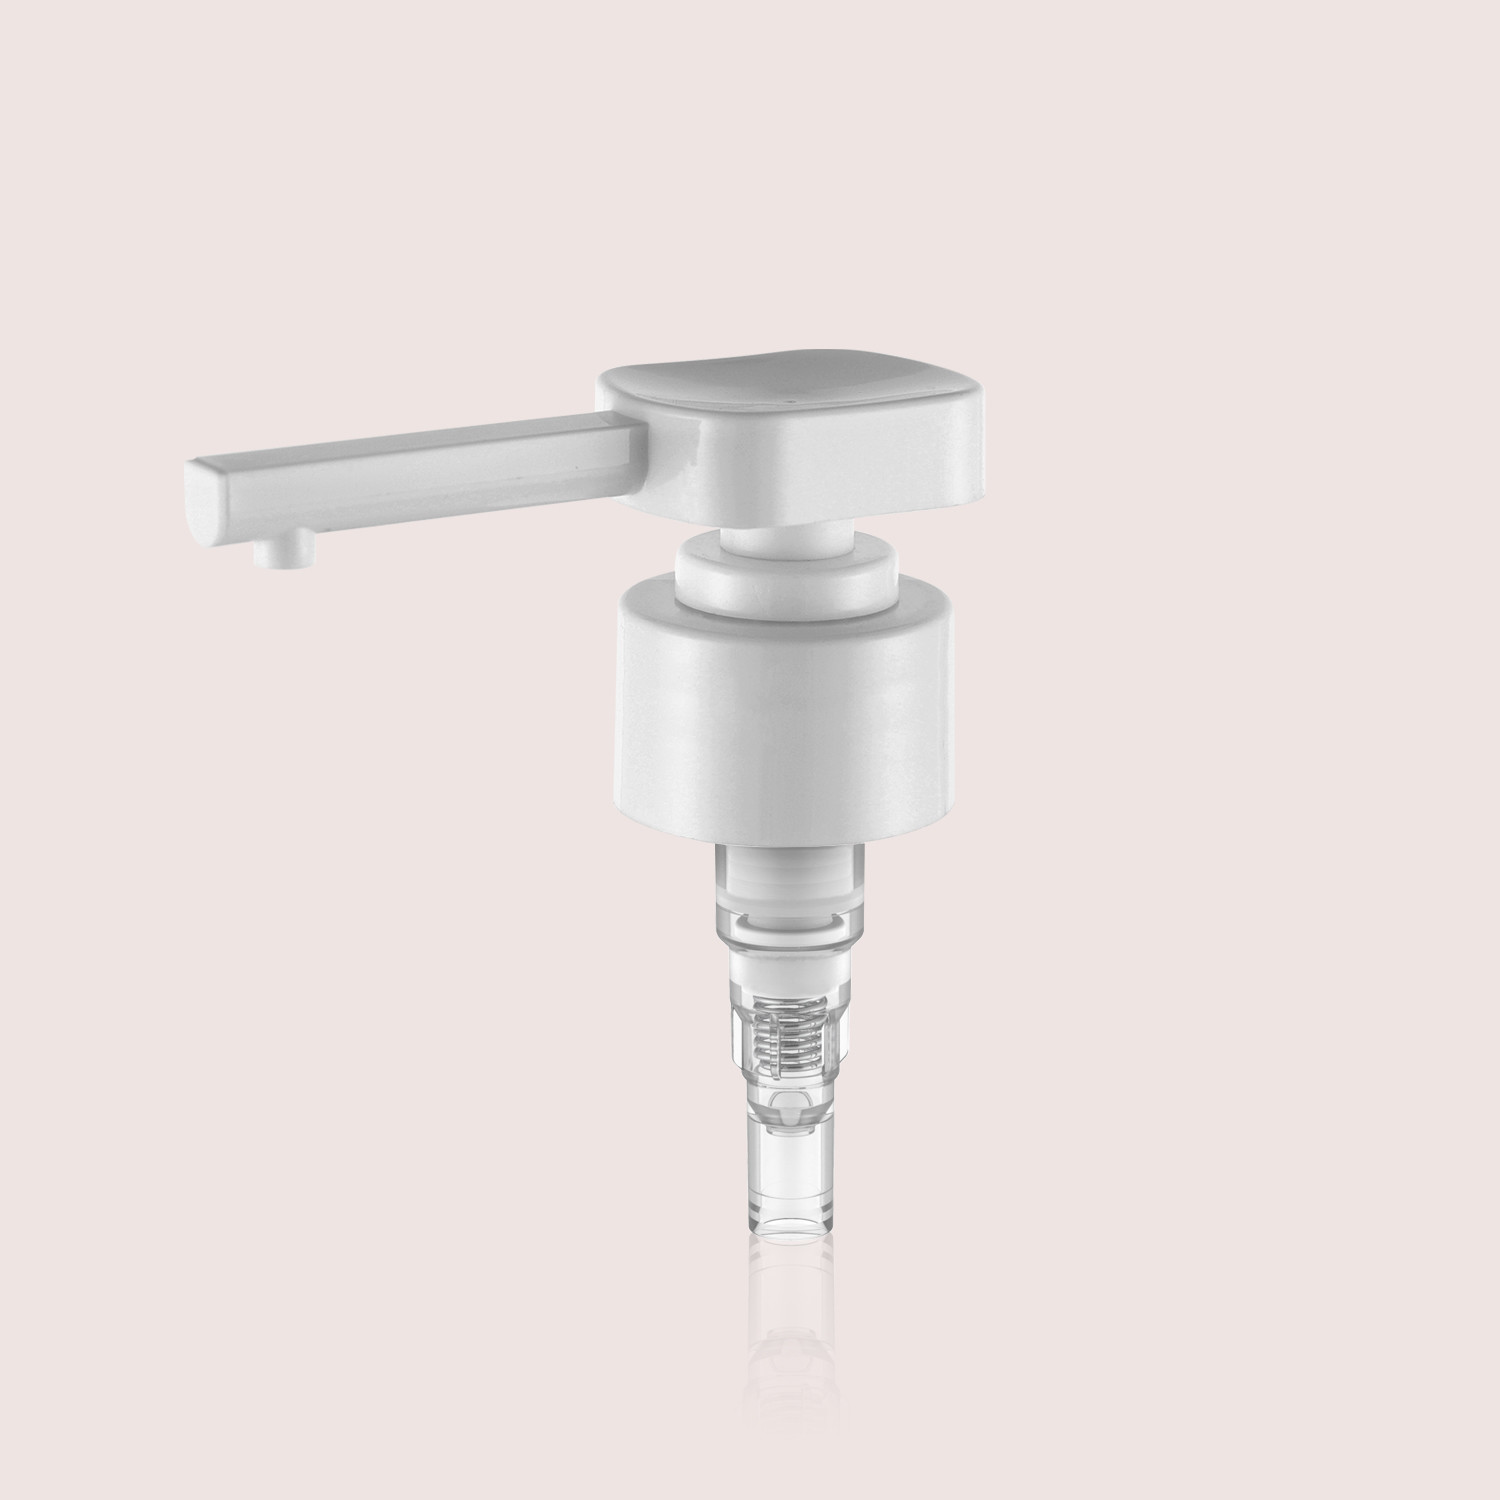  Y331-24 Plastic Down Locking Plastic Liquid Soap Dispenser Pump  For Shampoo And Hair Condition Manufactures